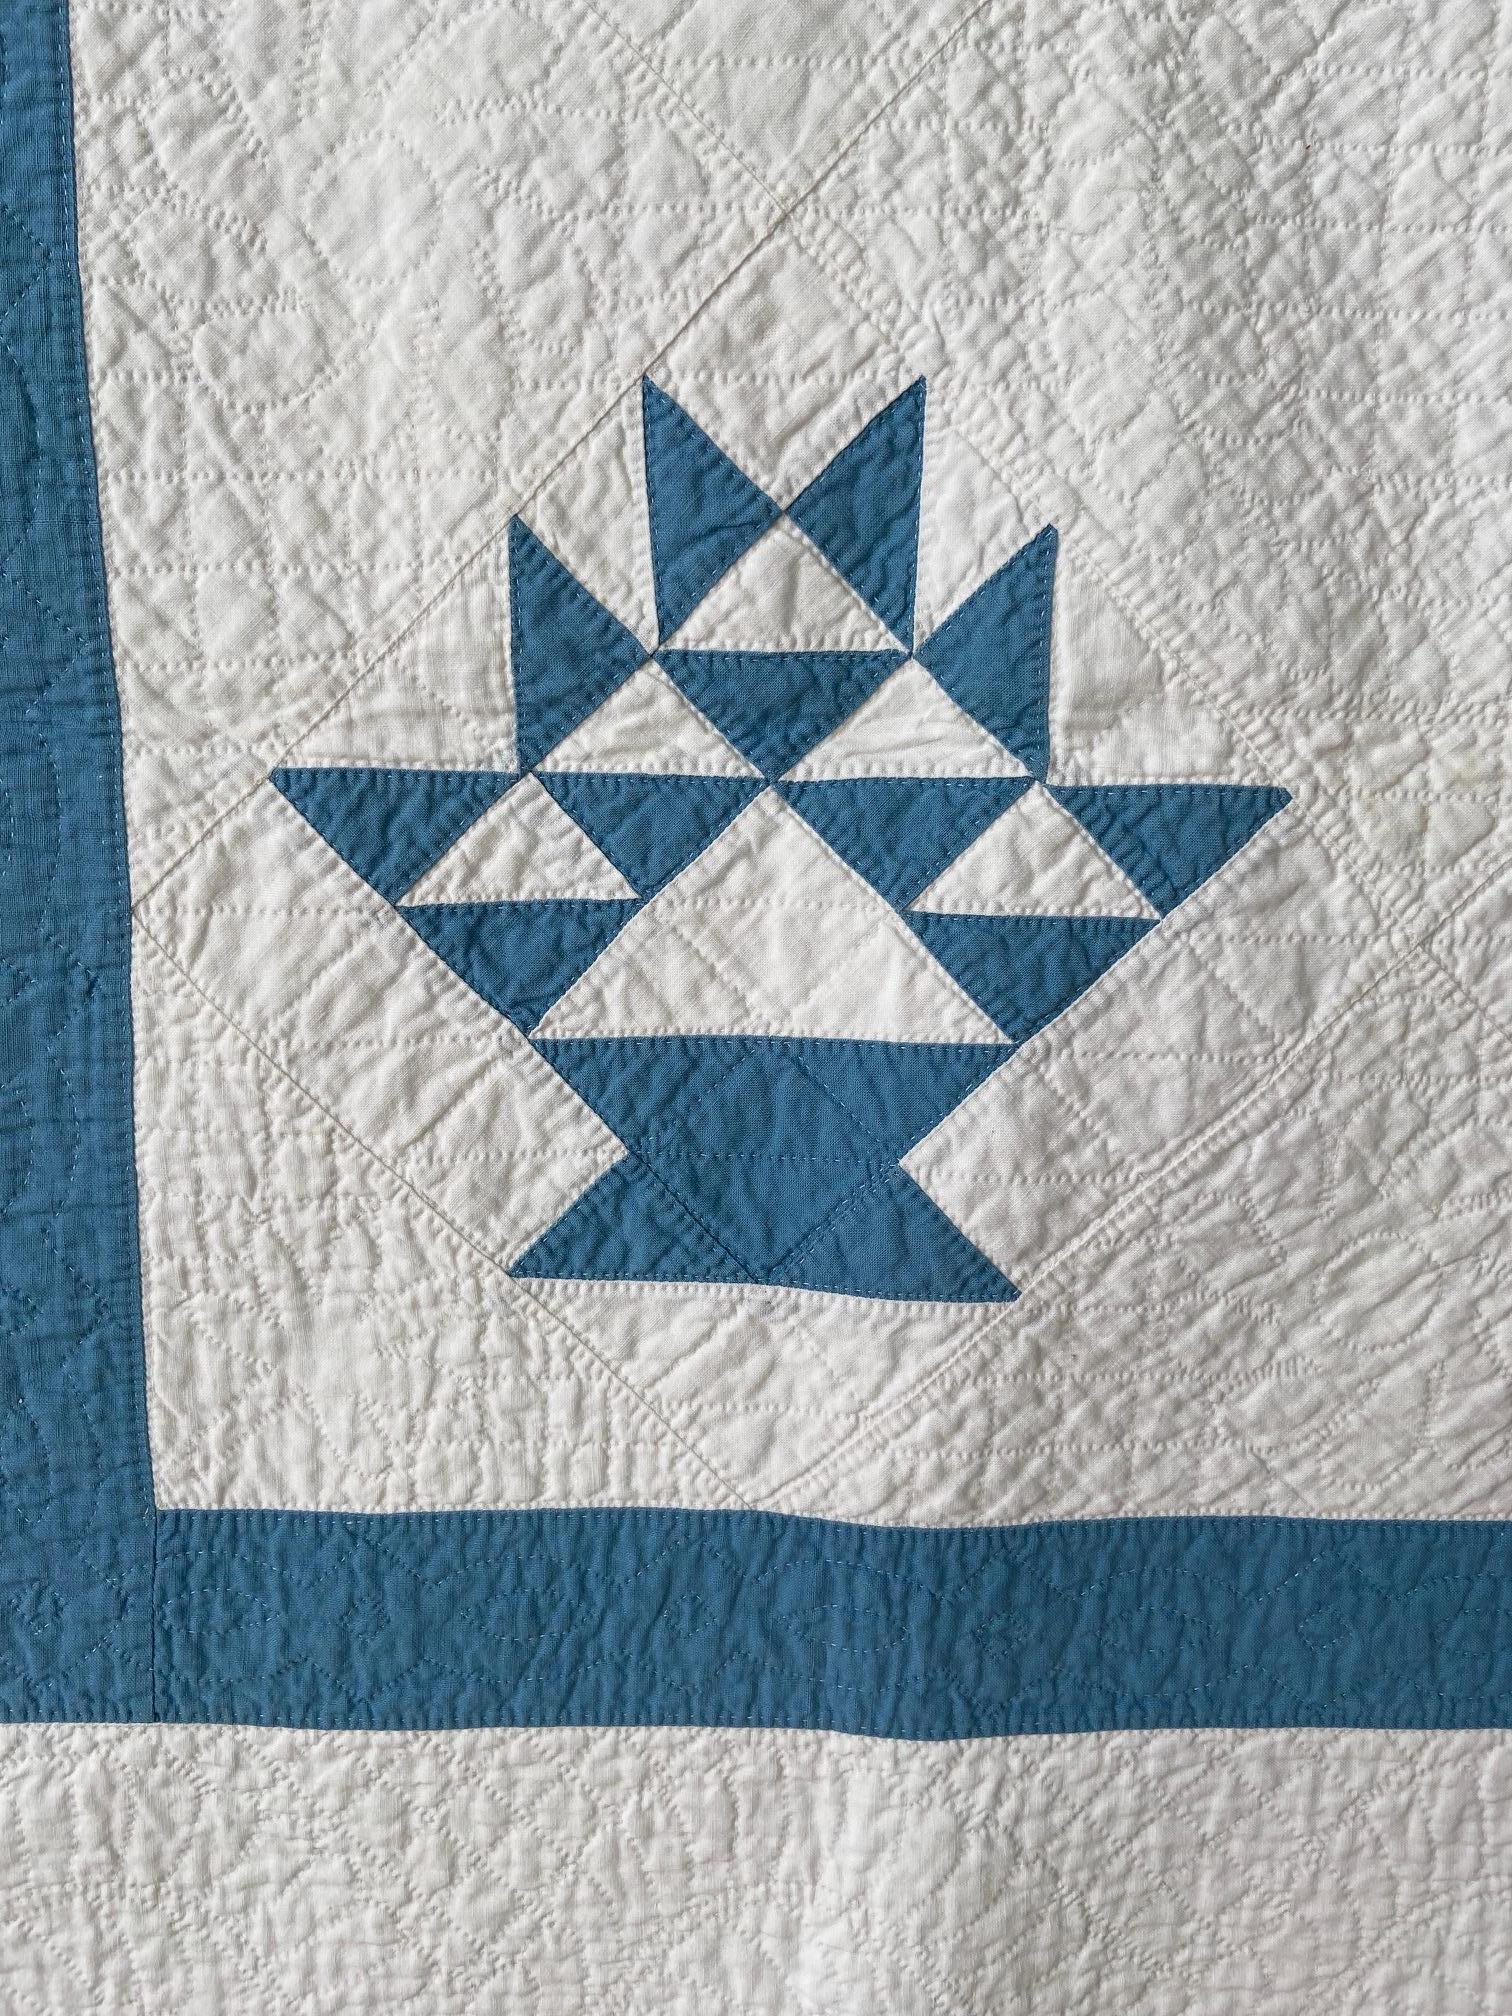 blue and white quilts